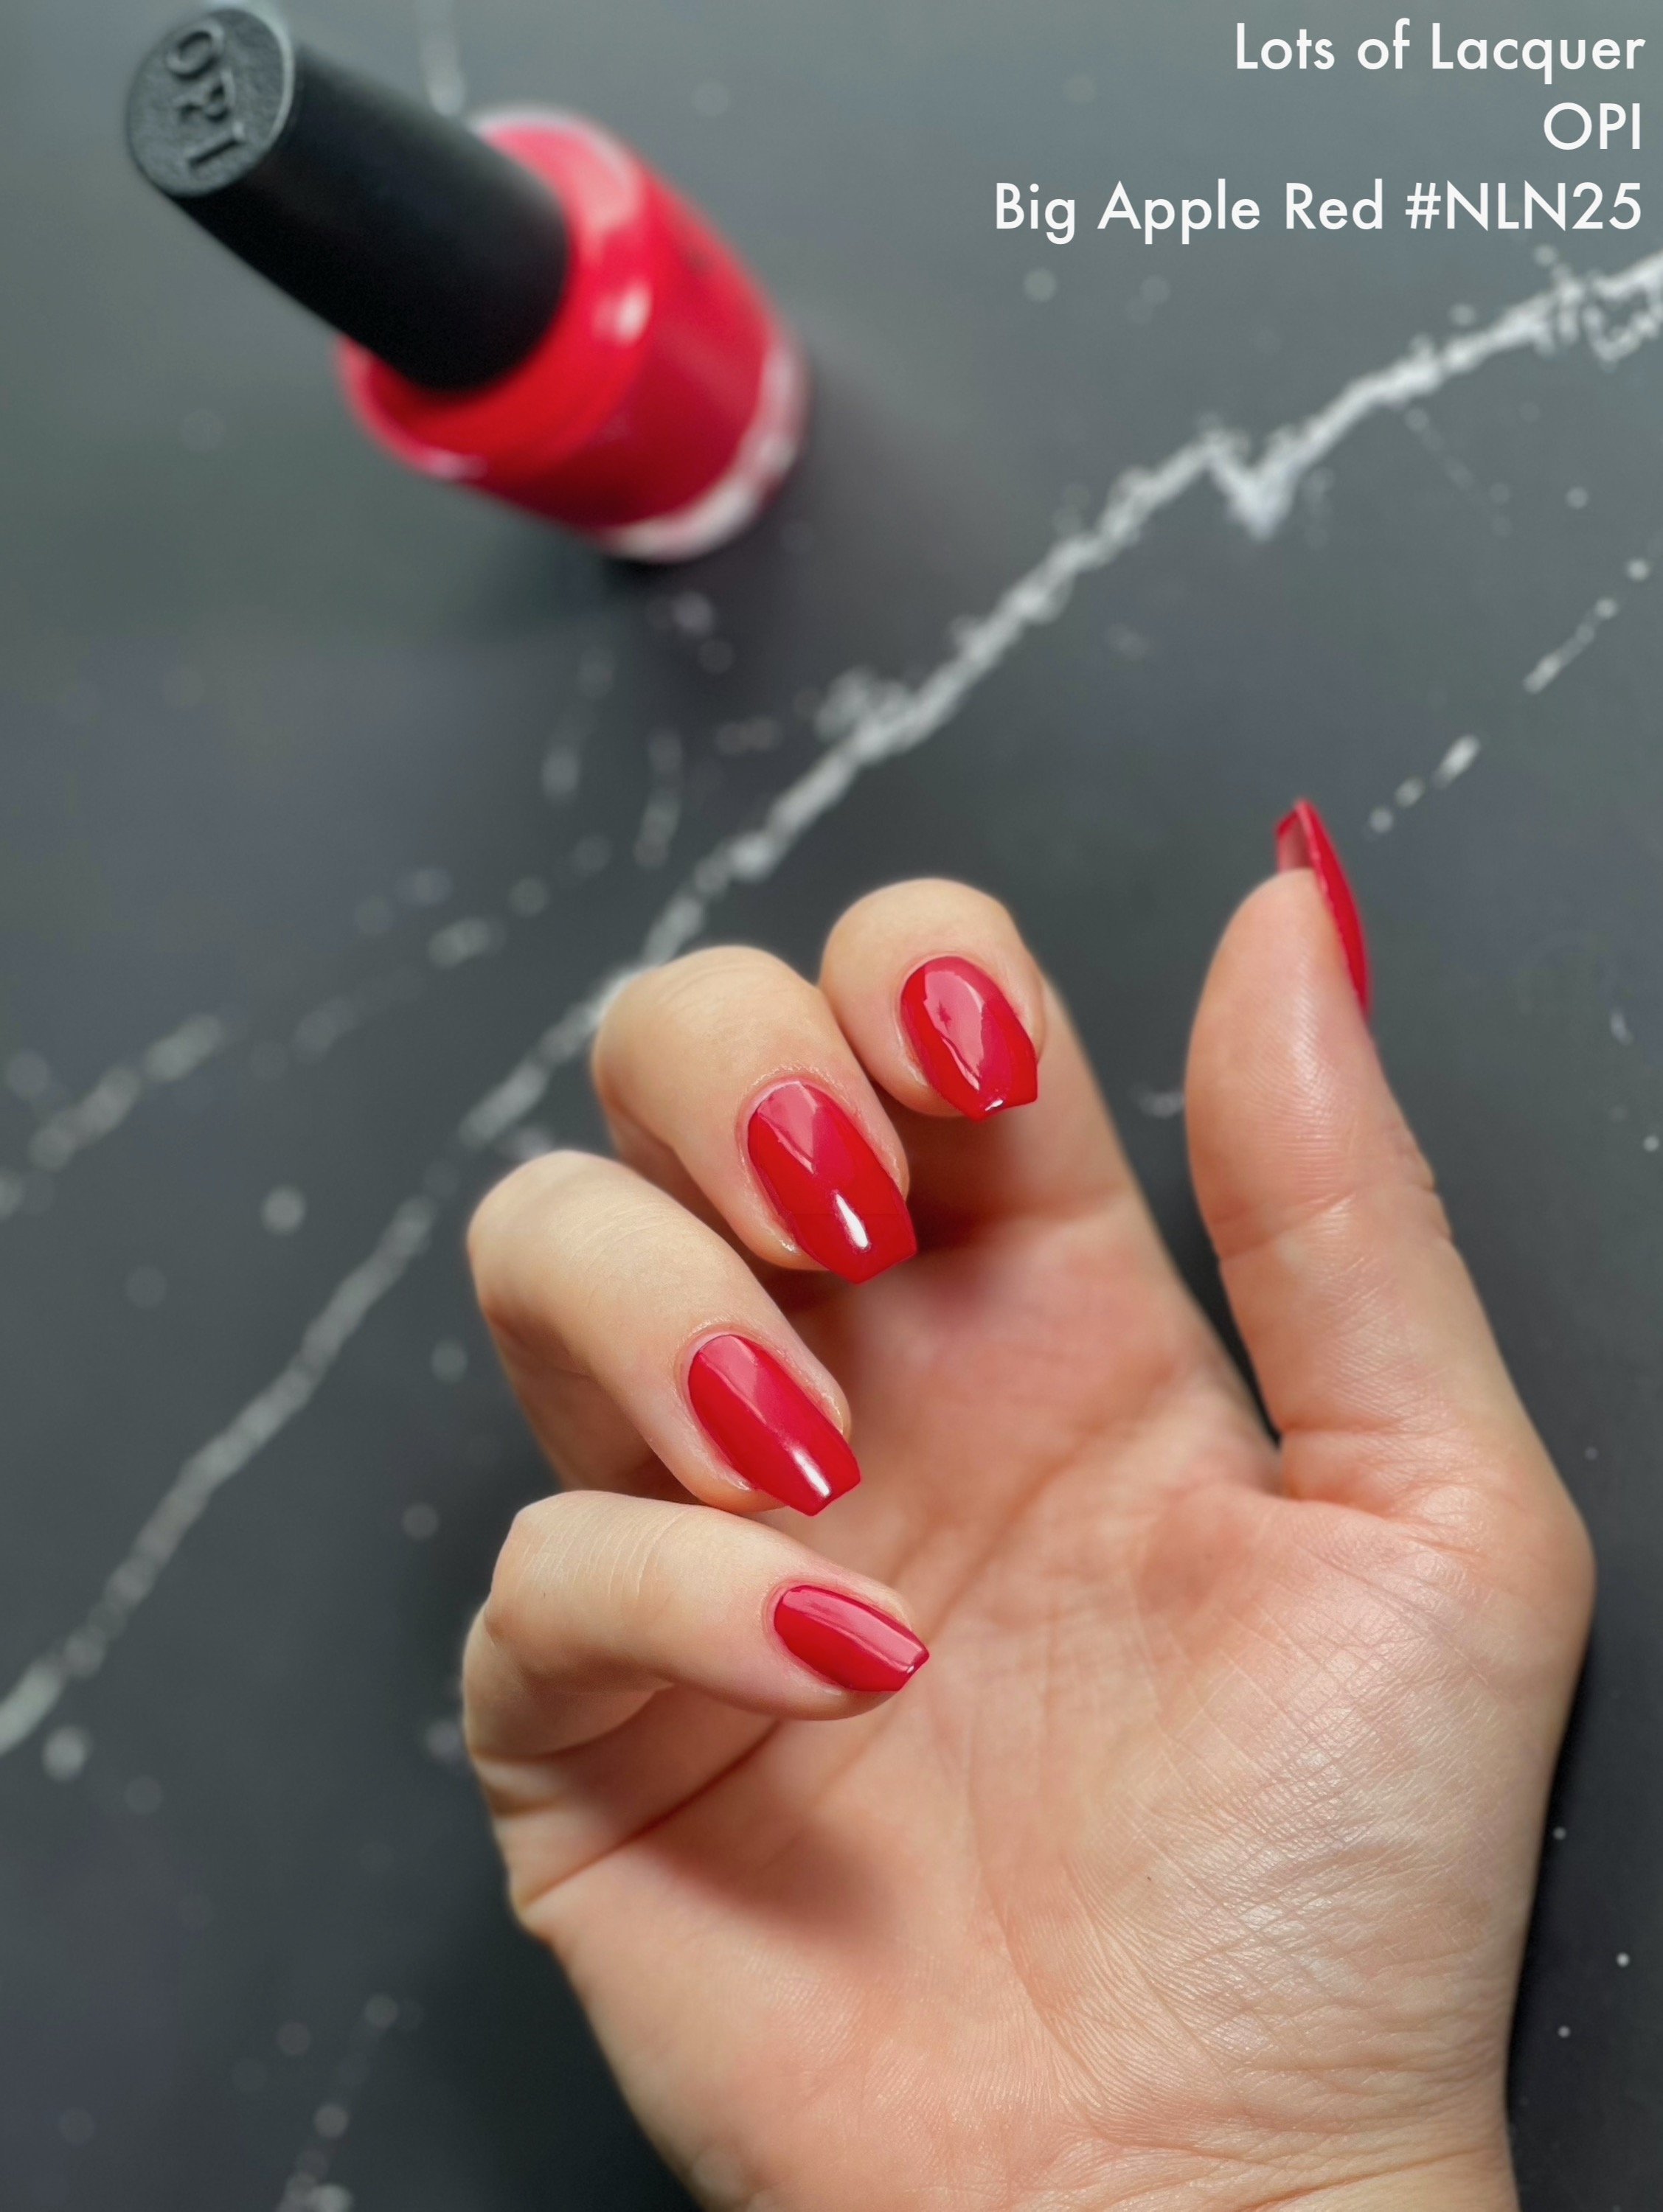 indre Berri tunnel OPI Big Apple Red Review — Lots of Lacquer